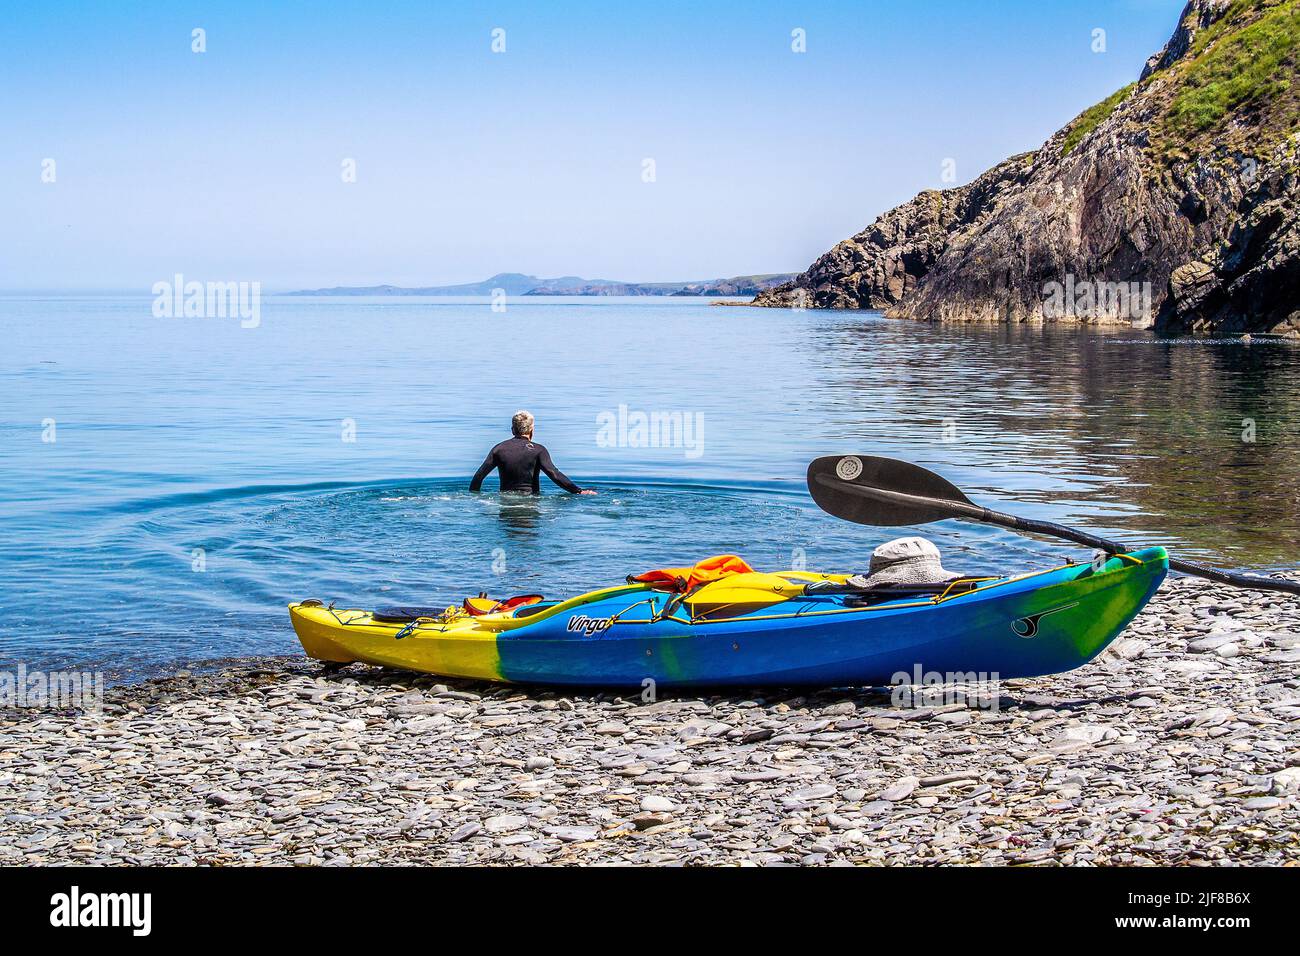 A kayaker swimming in the sea with kayak on beach, Pembrokeshire, Wales Stock Photo